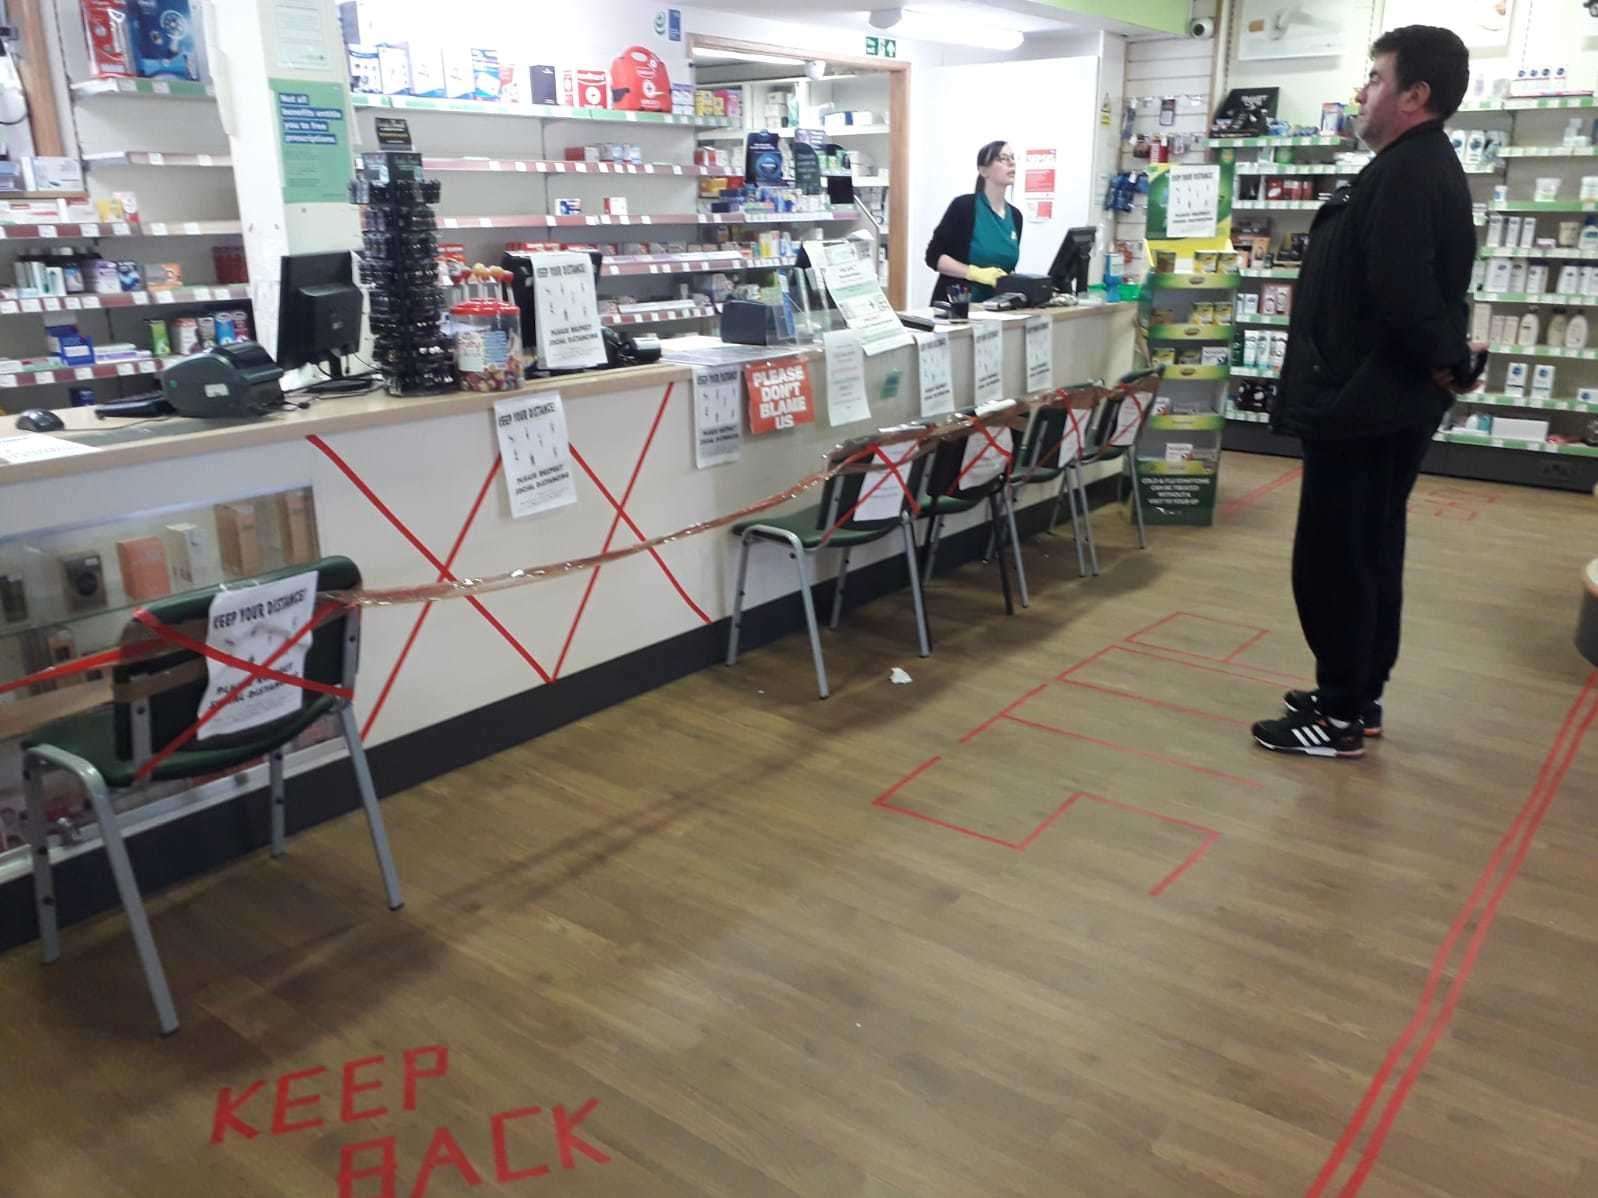 Paydens Larkfield has put in place social distancing measures to protect staff and customers